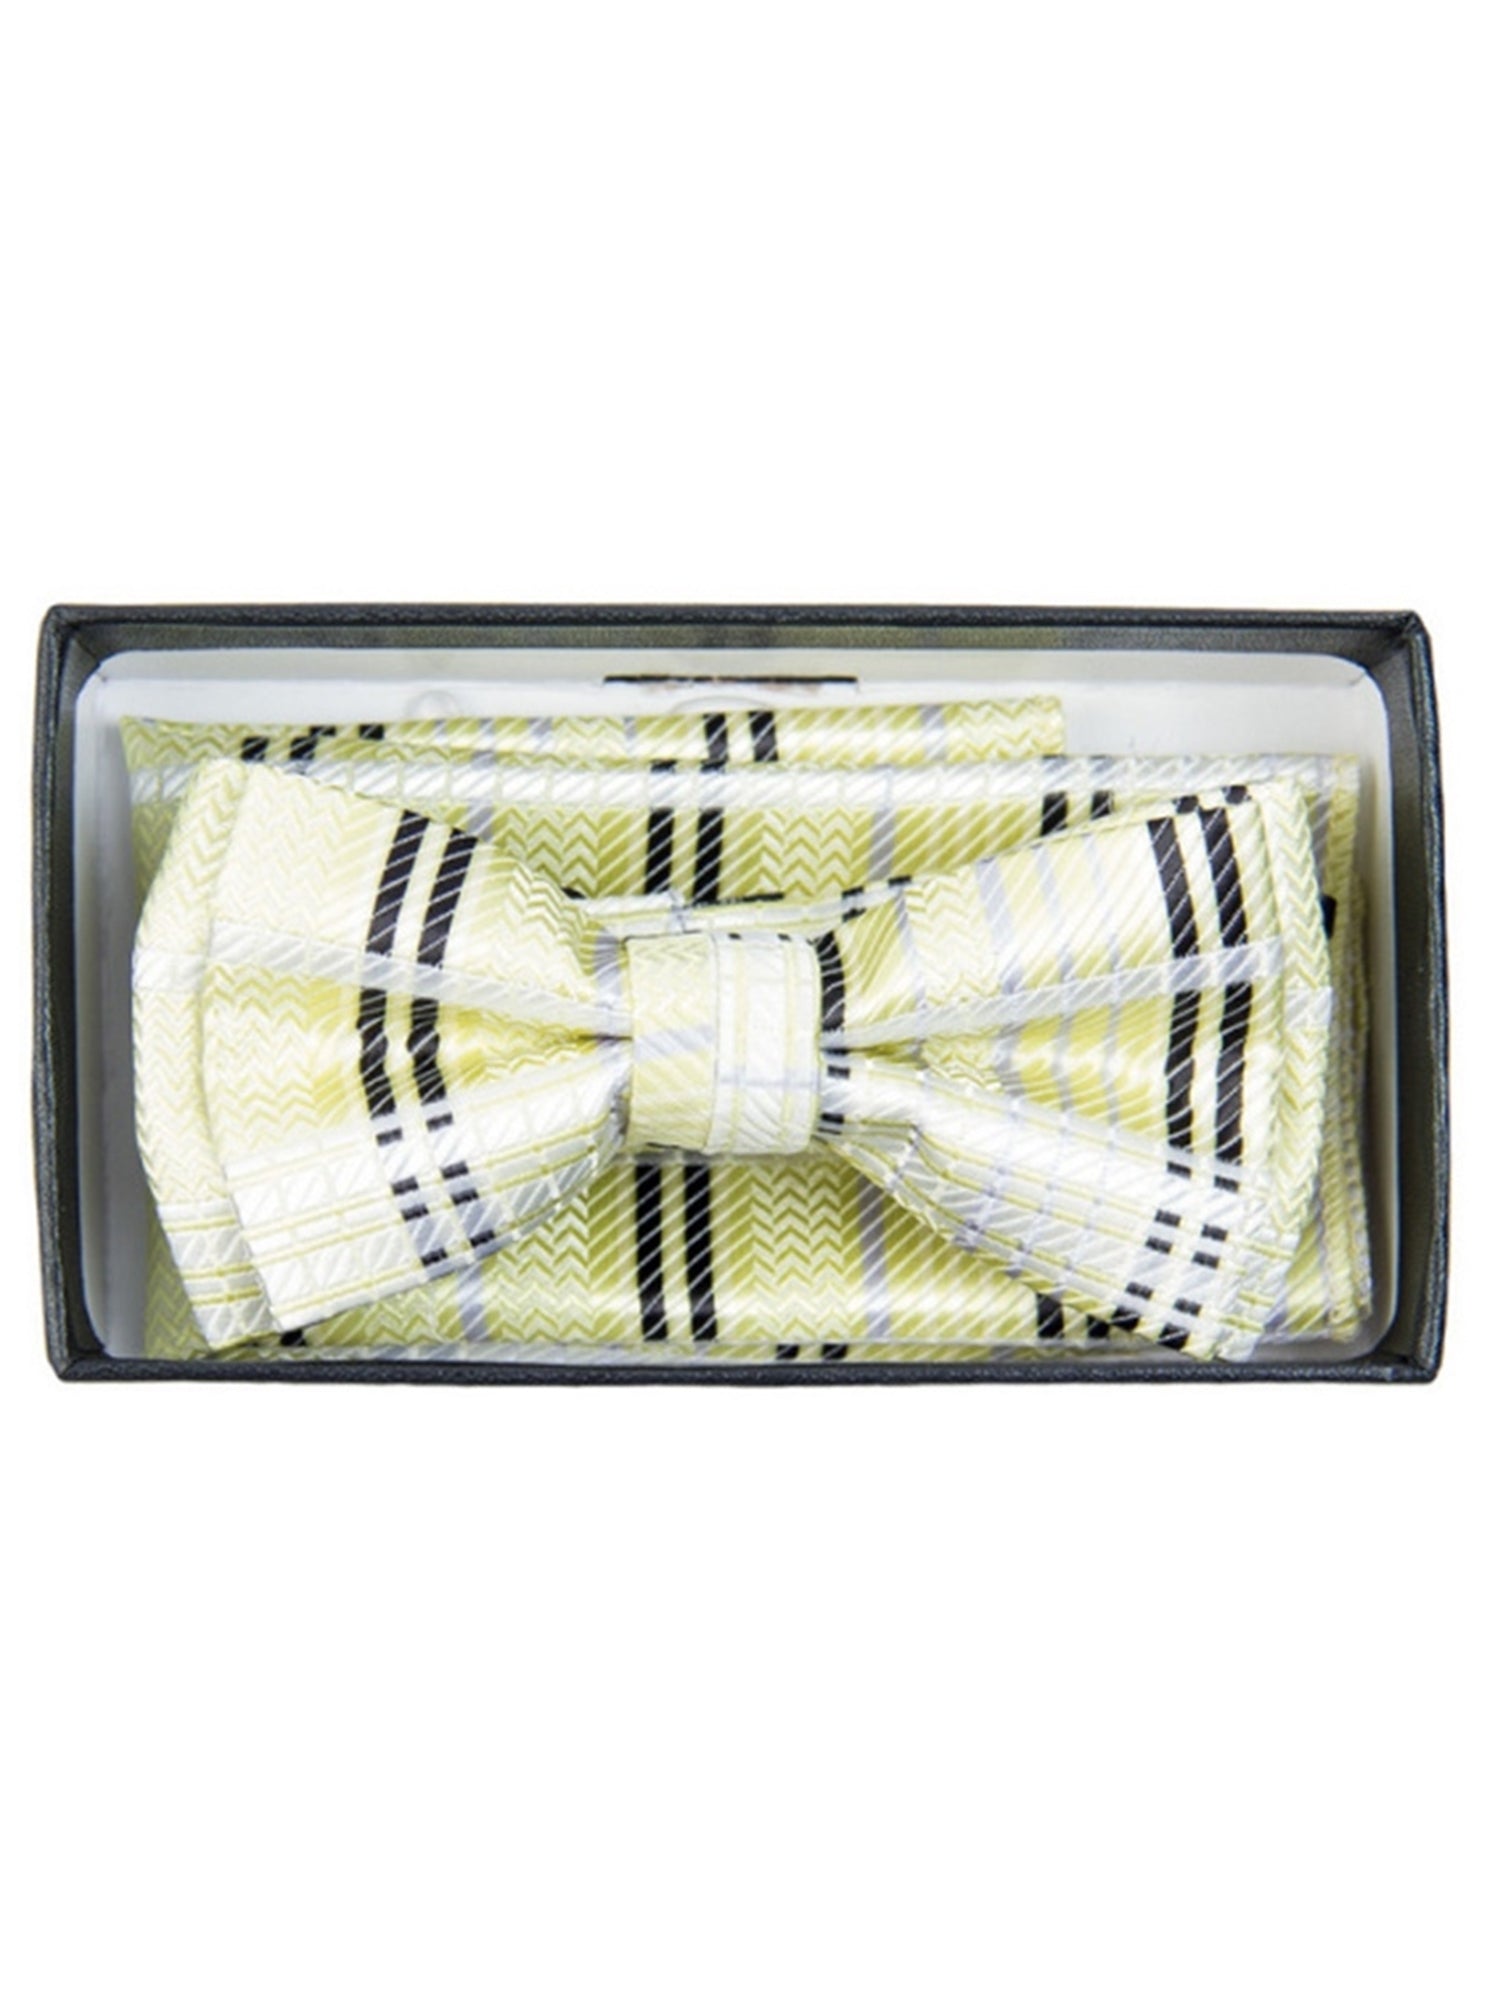 Young Boy's Fancy Pre-tied Adjustable Band Bow Tie With Hanky Neck Tie TheDapperTie Green And Black Plaid One Size 